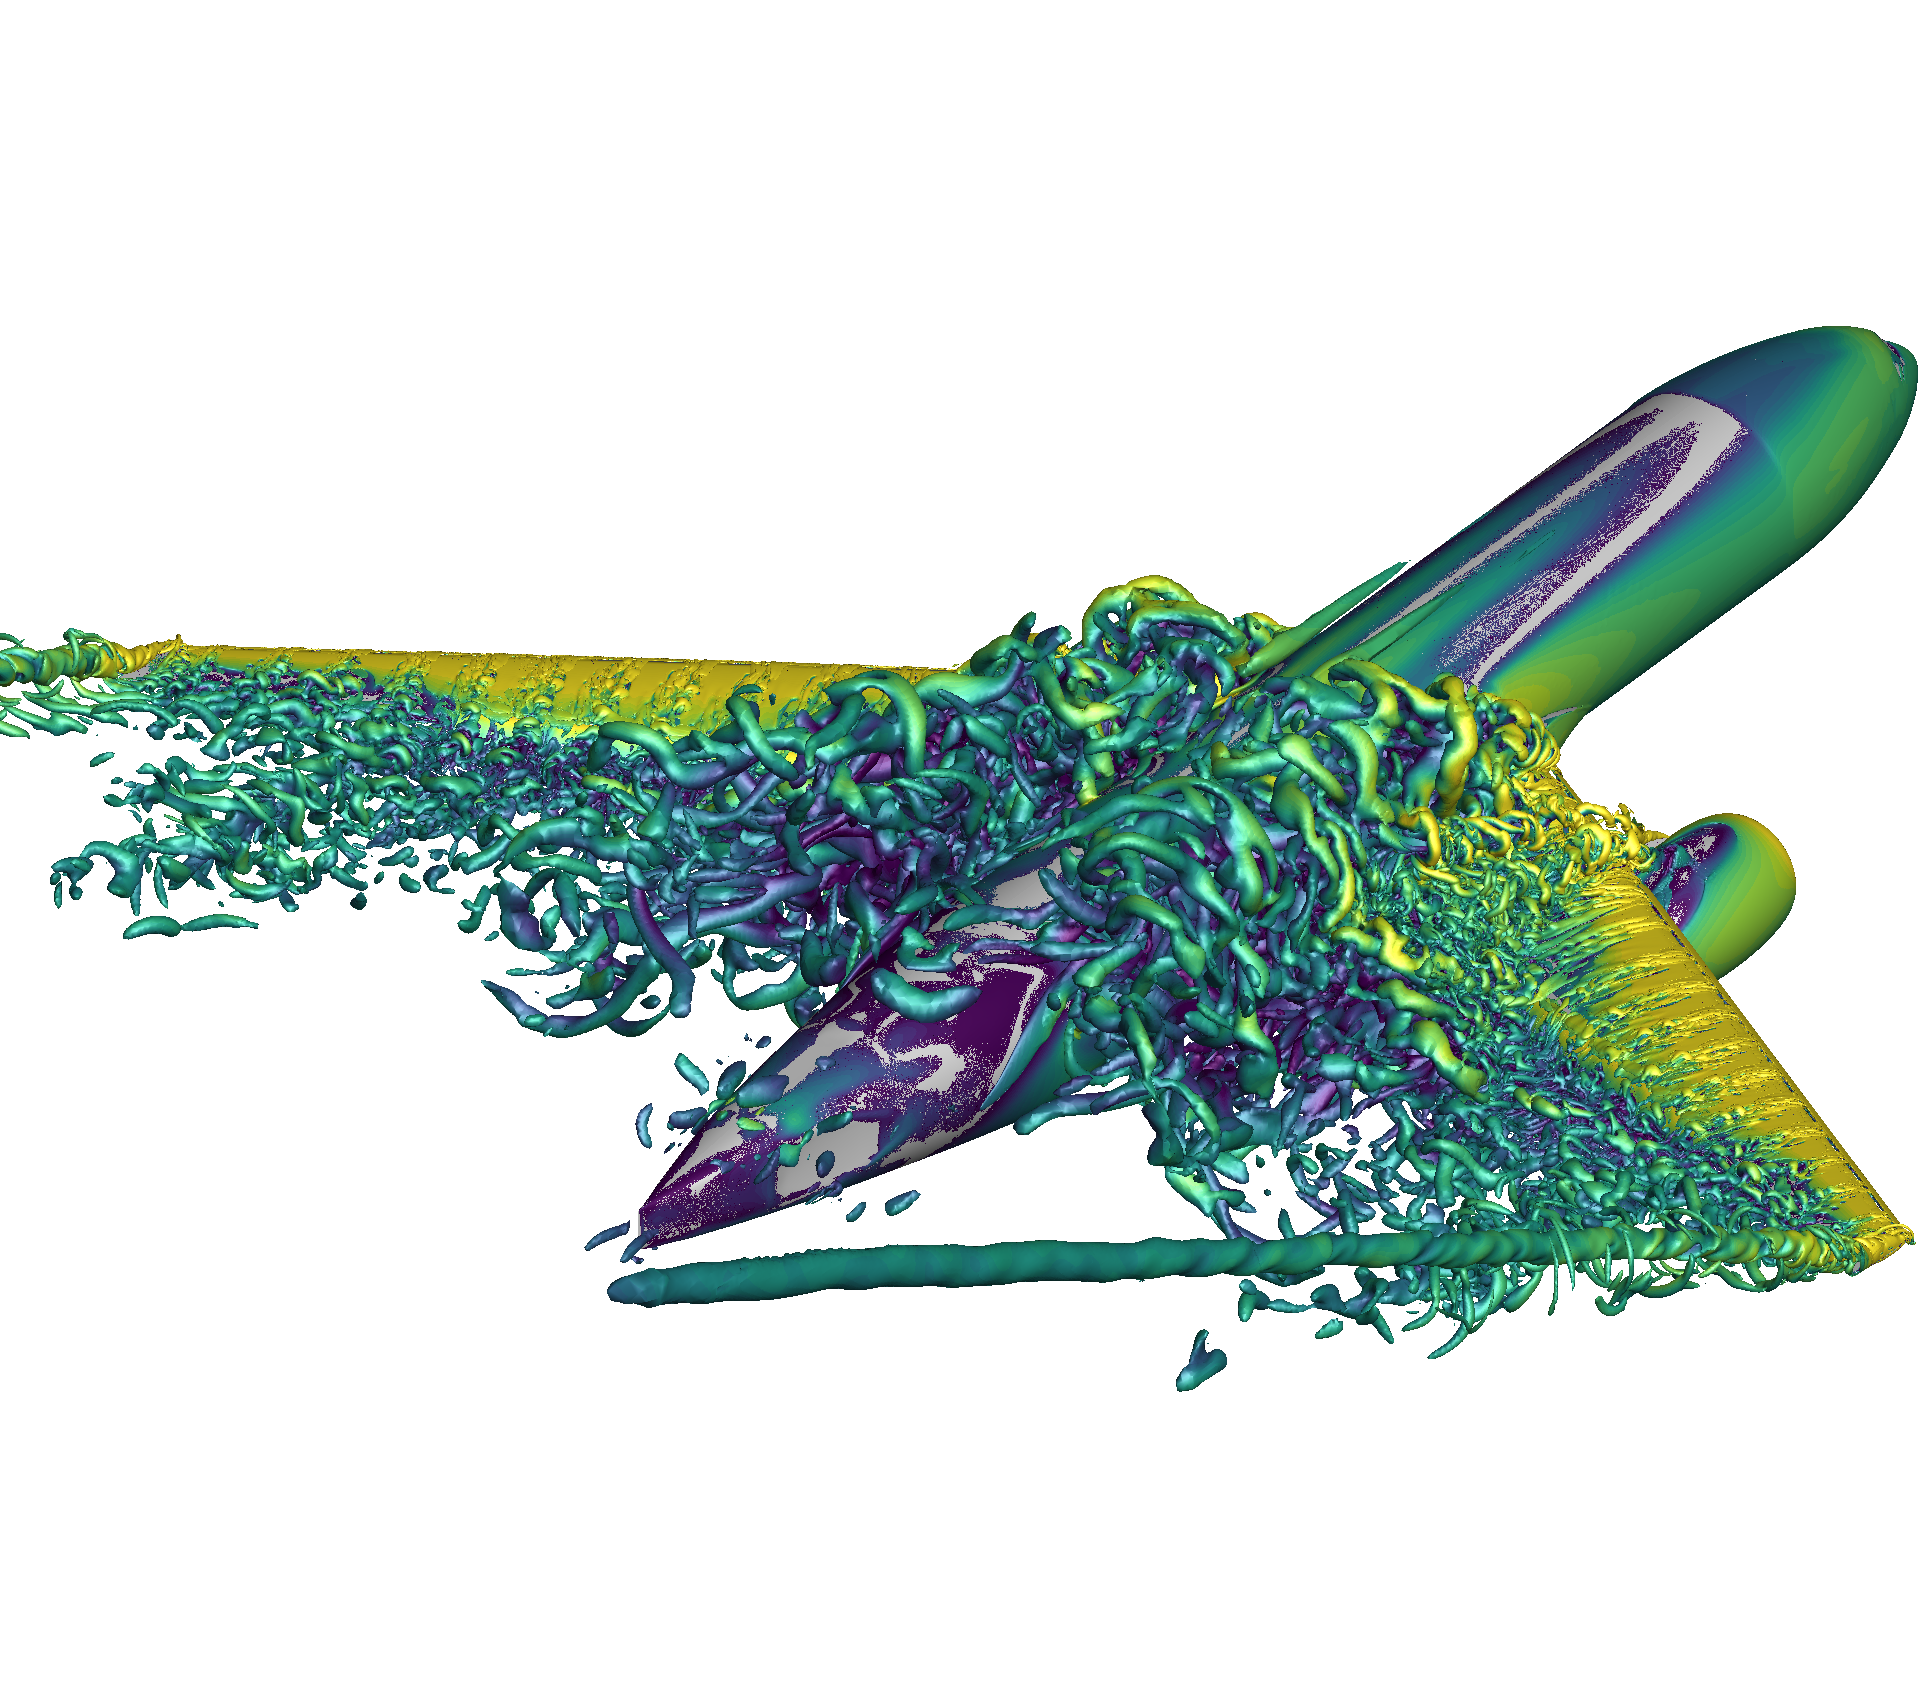 CFD Simulation Methods for High-Lift Aircraft Configurations (Part 1 of 3)